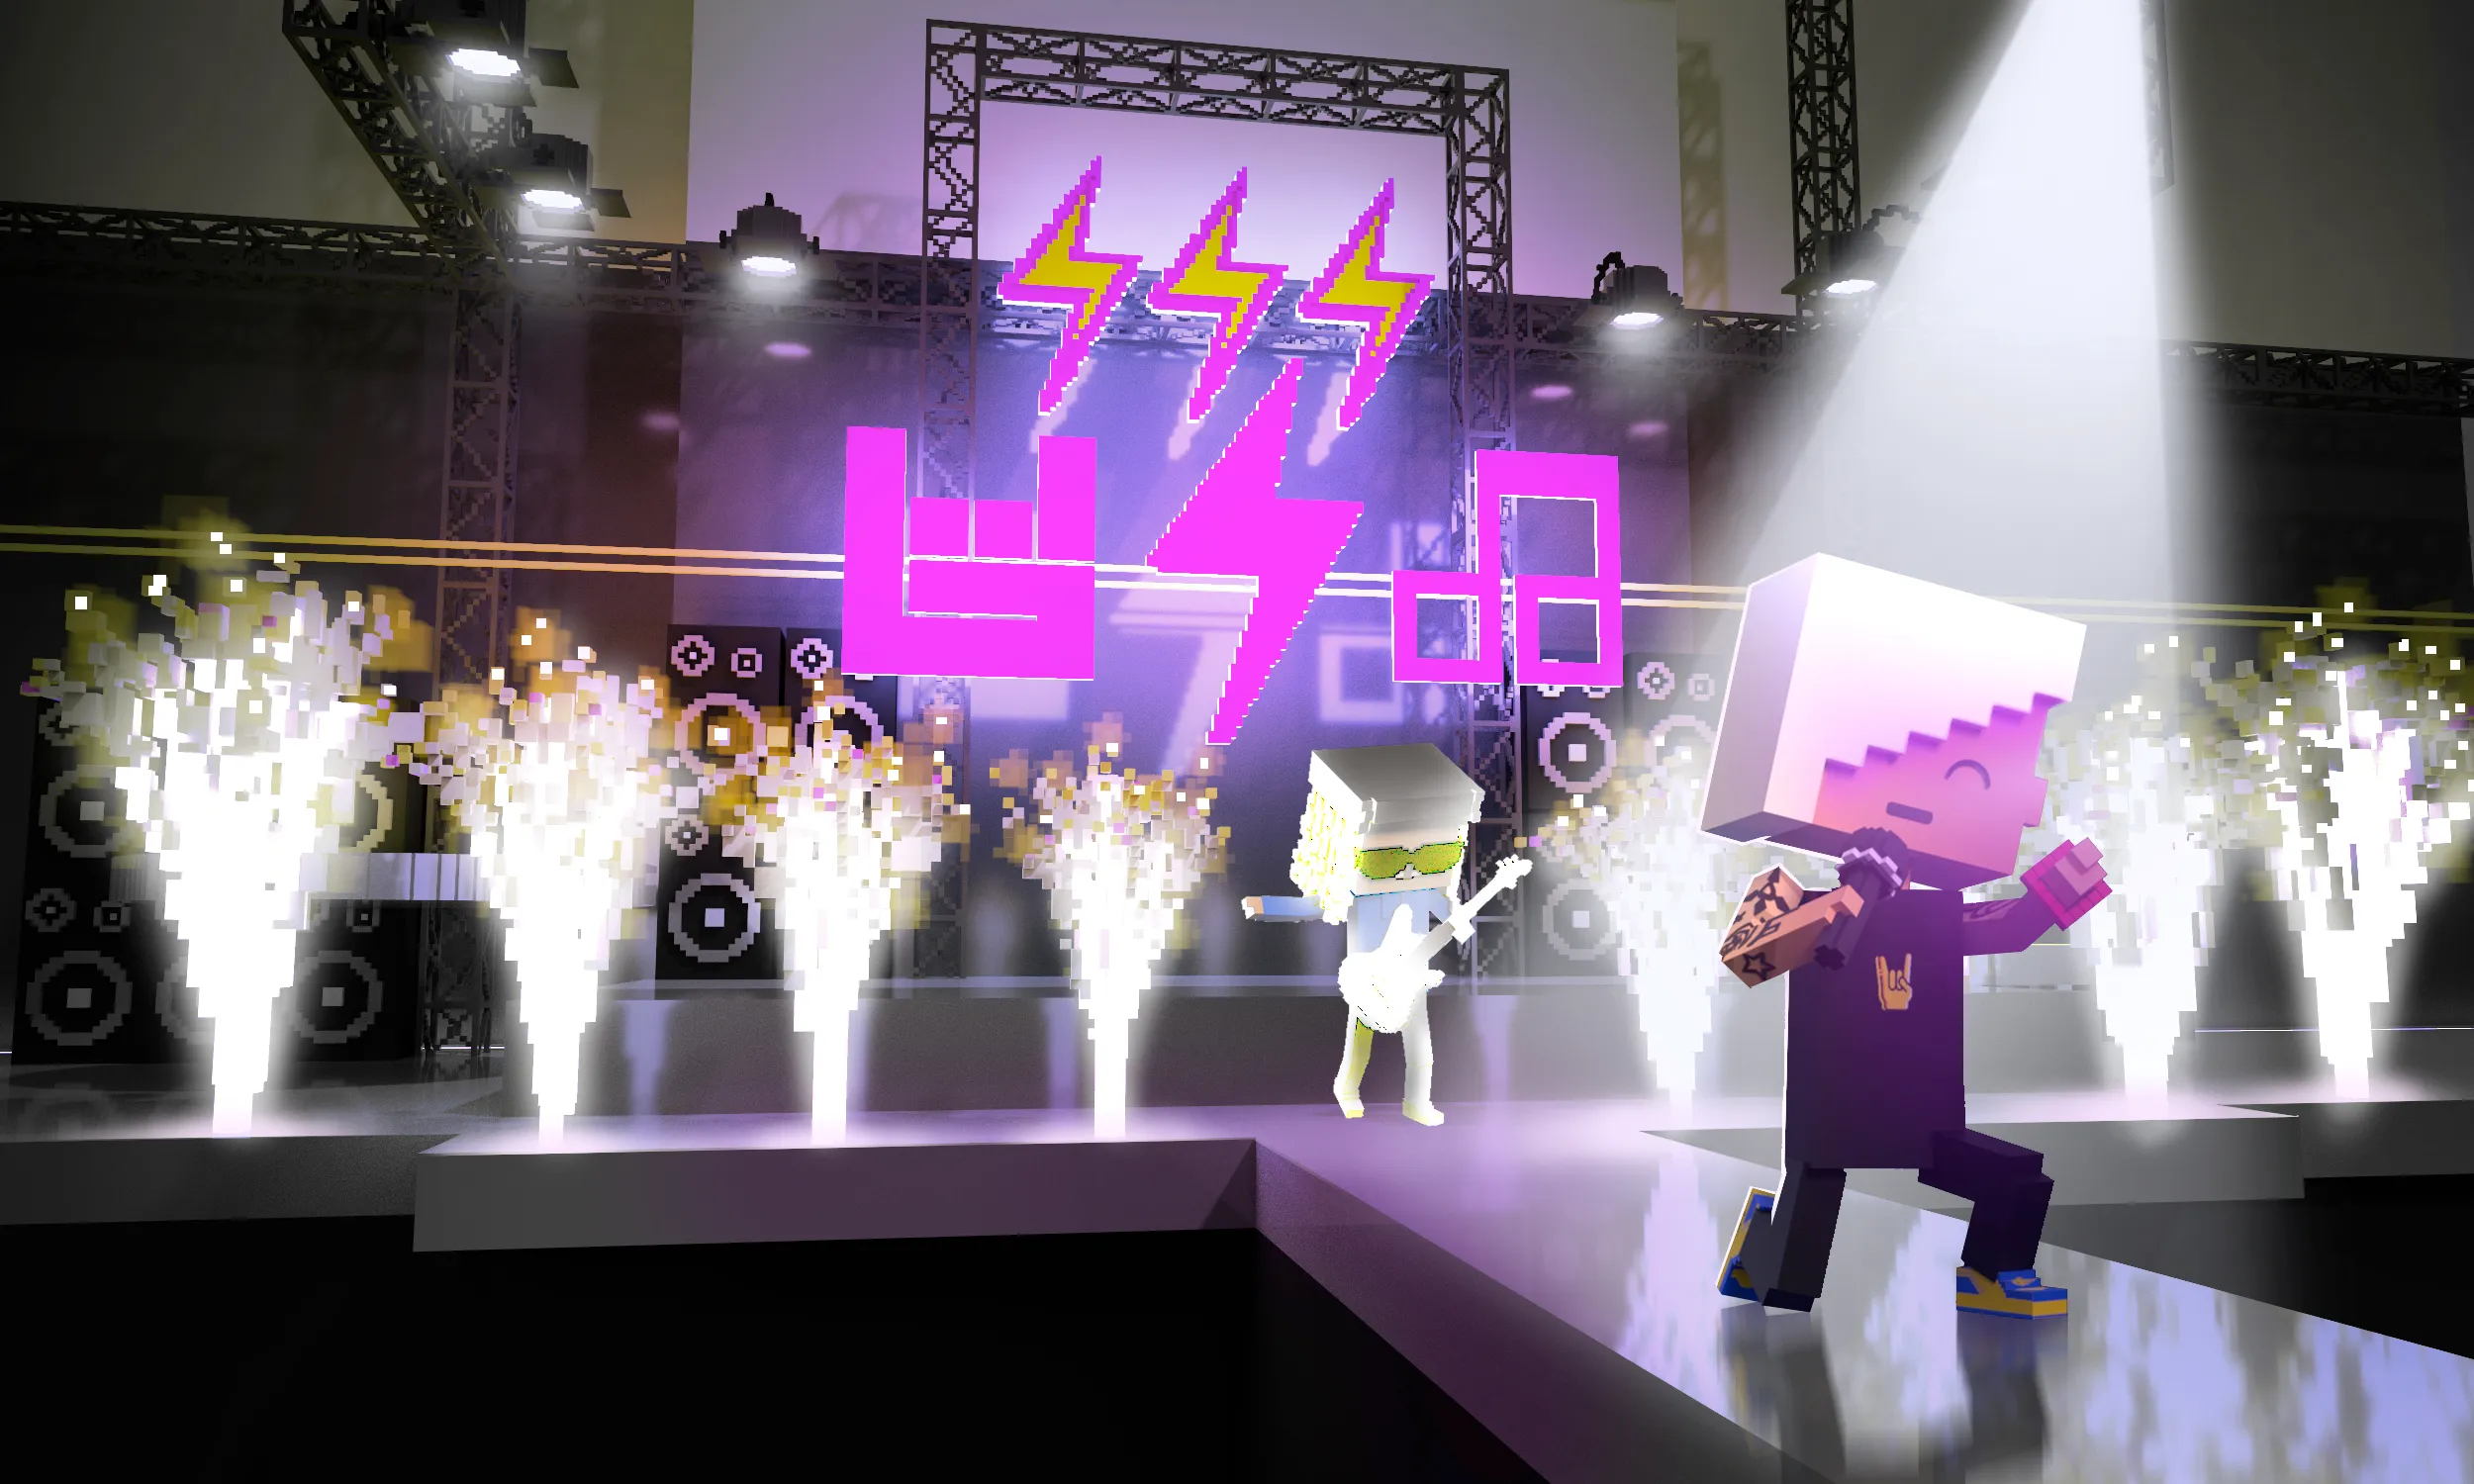 This Blockstars picture showcases two performers on stage, one singing and the other playing guitar, with mini fireworks creating a vibrant atmosphere.